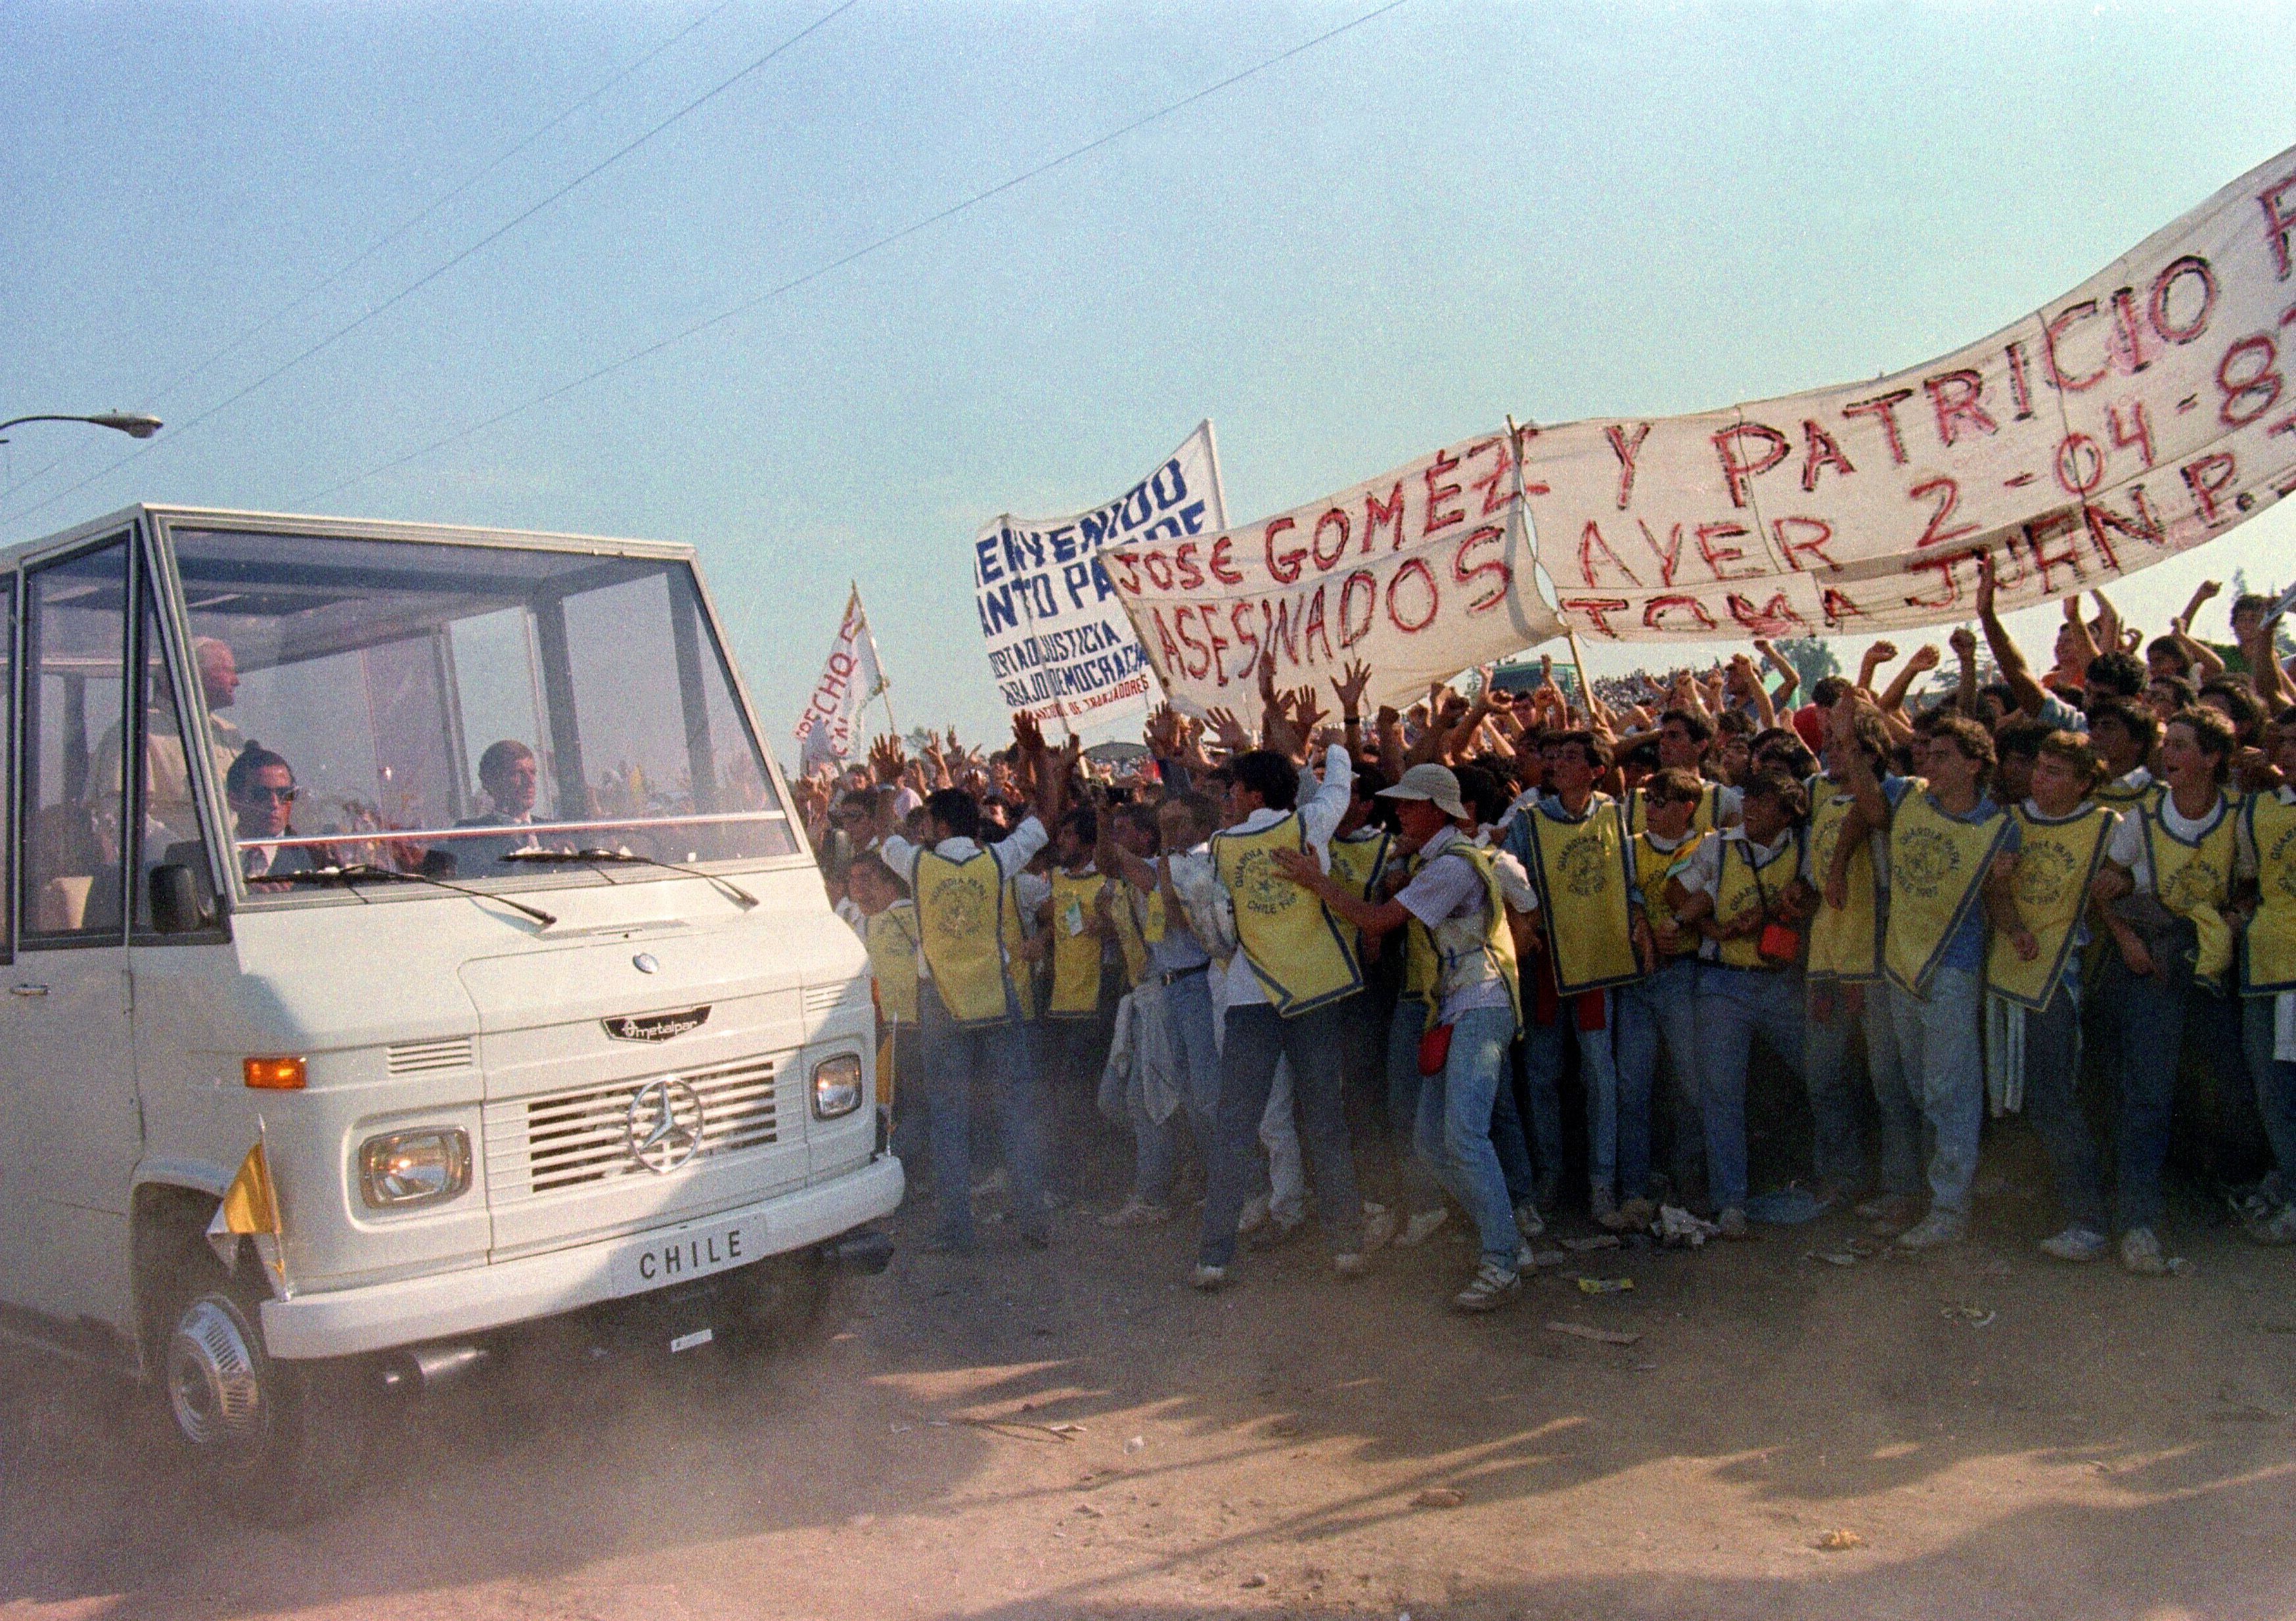 a crowd of protesters in yellow vest, on the right, hold up large signs as Pope John Paul II drives by in the Popemobile